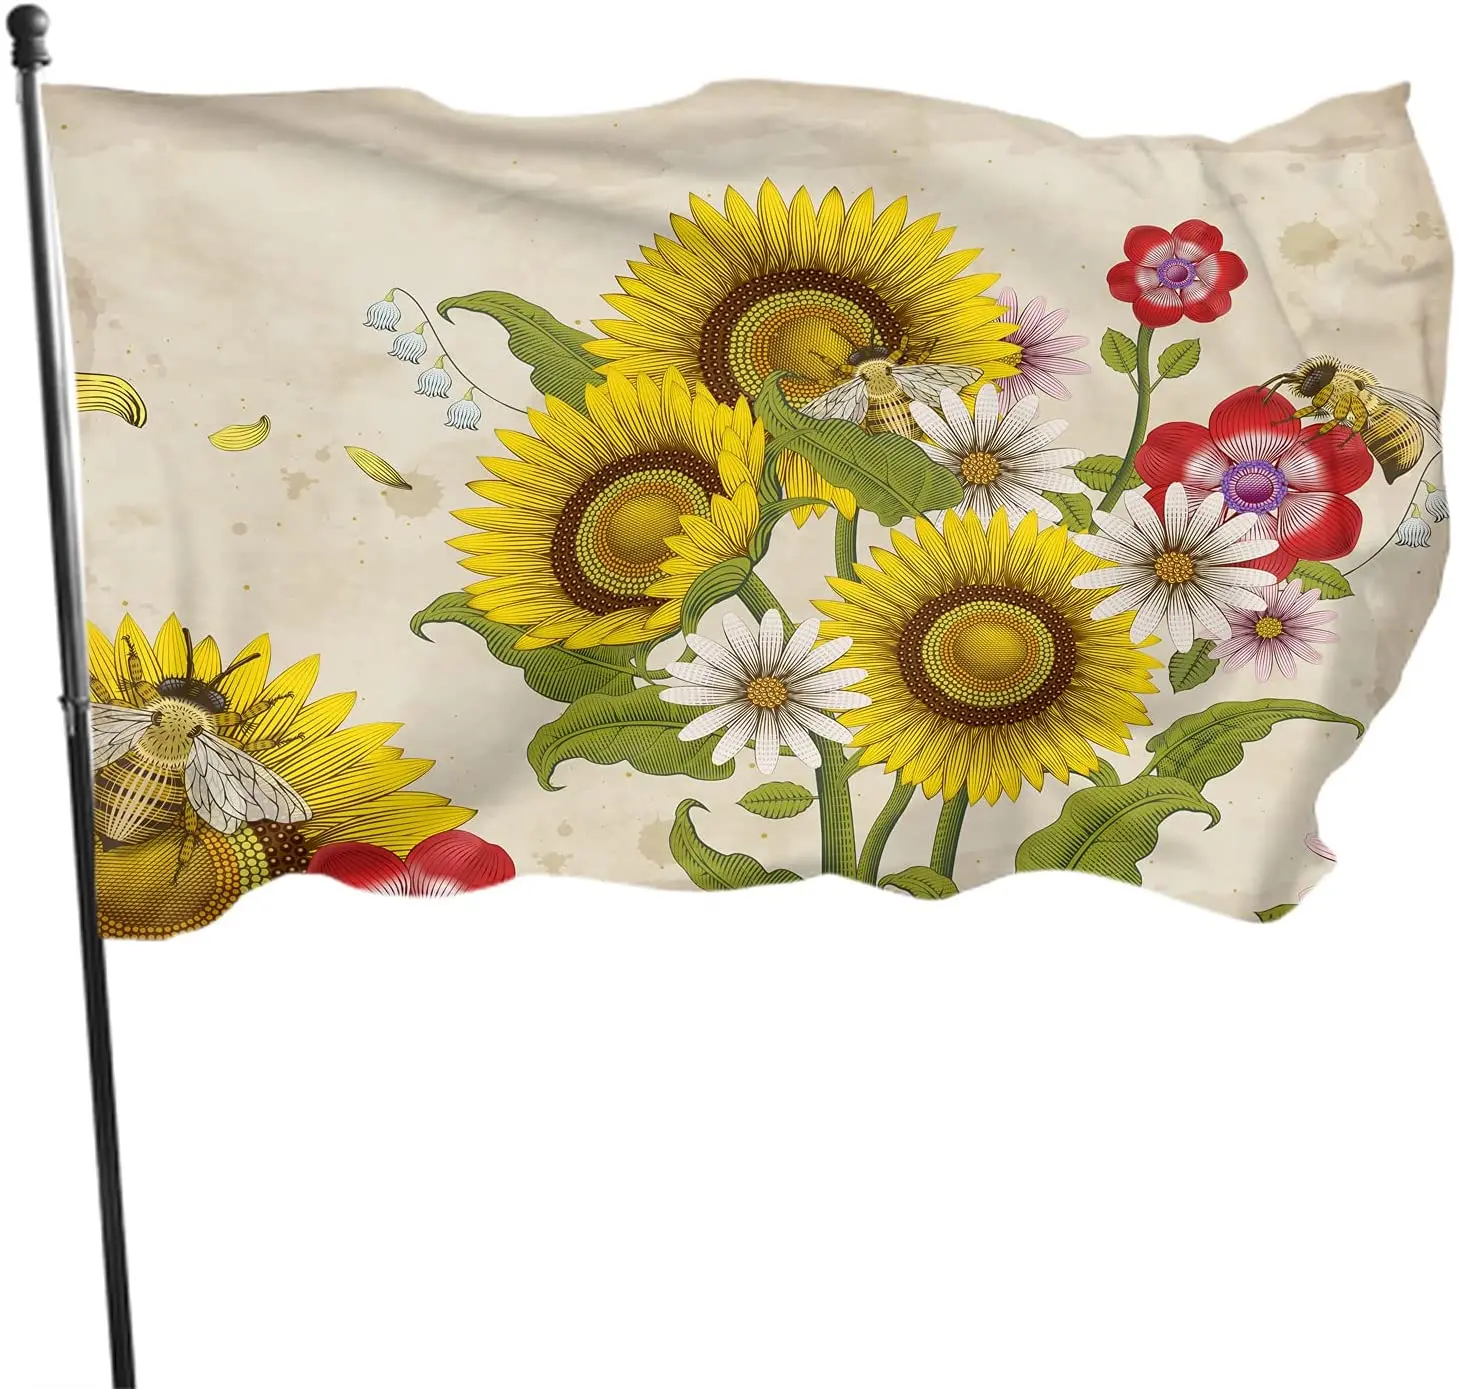 

Sunflowers Flag 3x5 Ft Outdoor Yellow Sunflower Pink Red White Flowers Bees Garden Flags House Flags Banner Decor for Courtyard